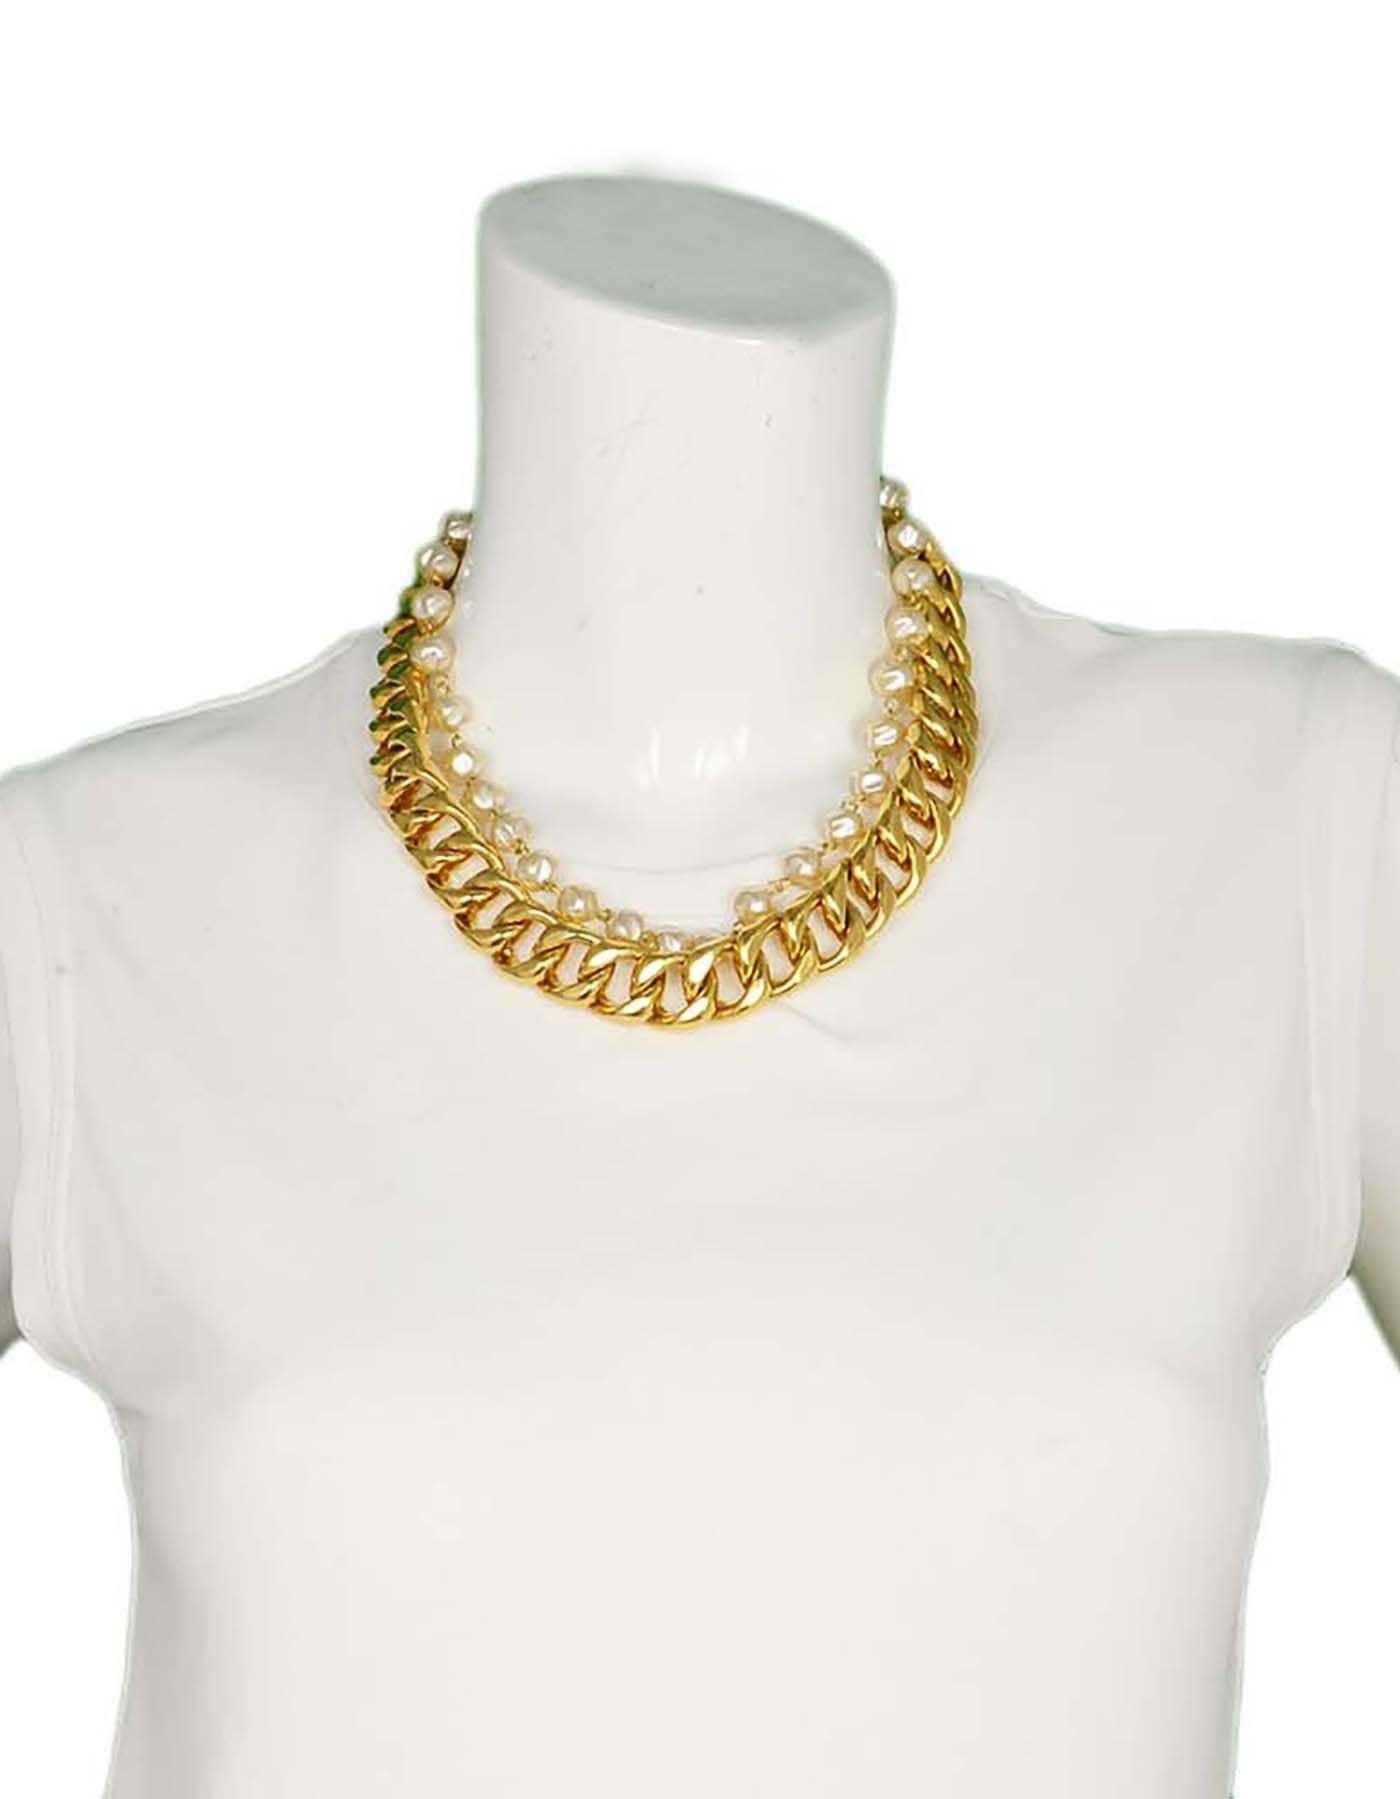 Women's Chanel Vintage '88 Gold Chain Link & Small Pearl Choker Necklace